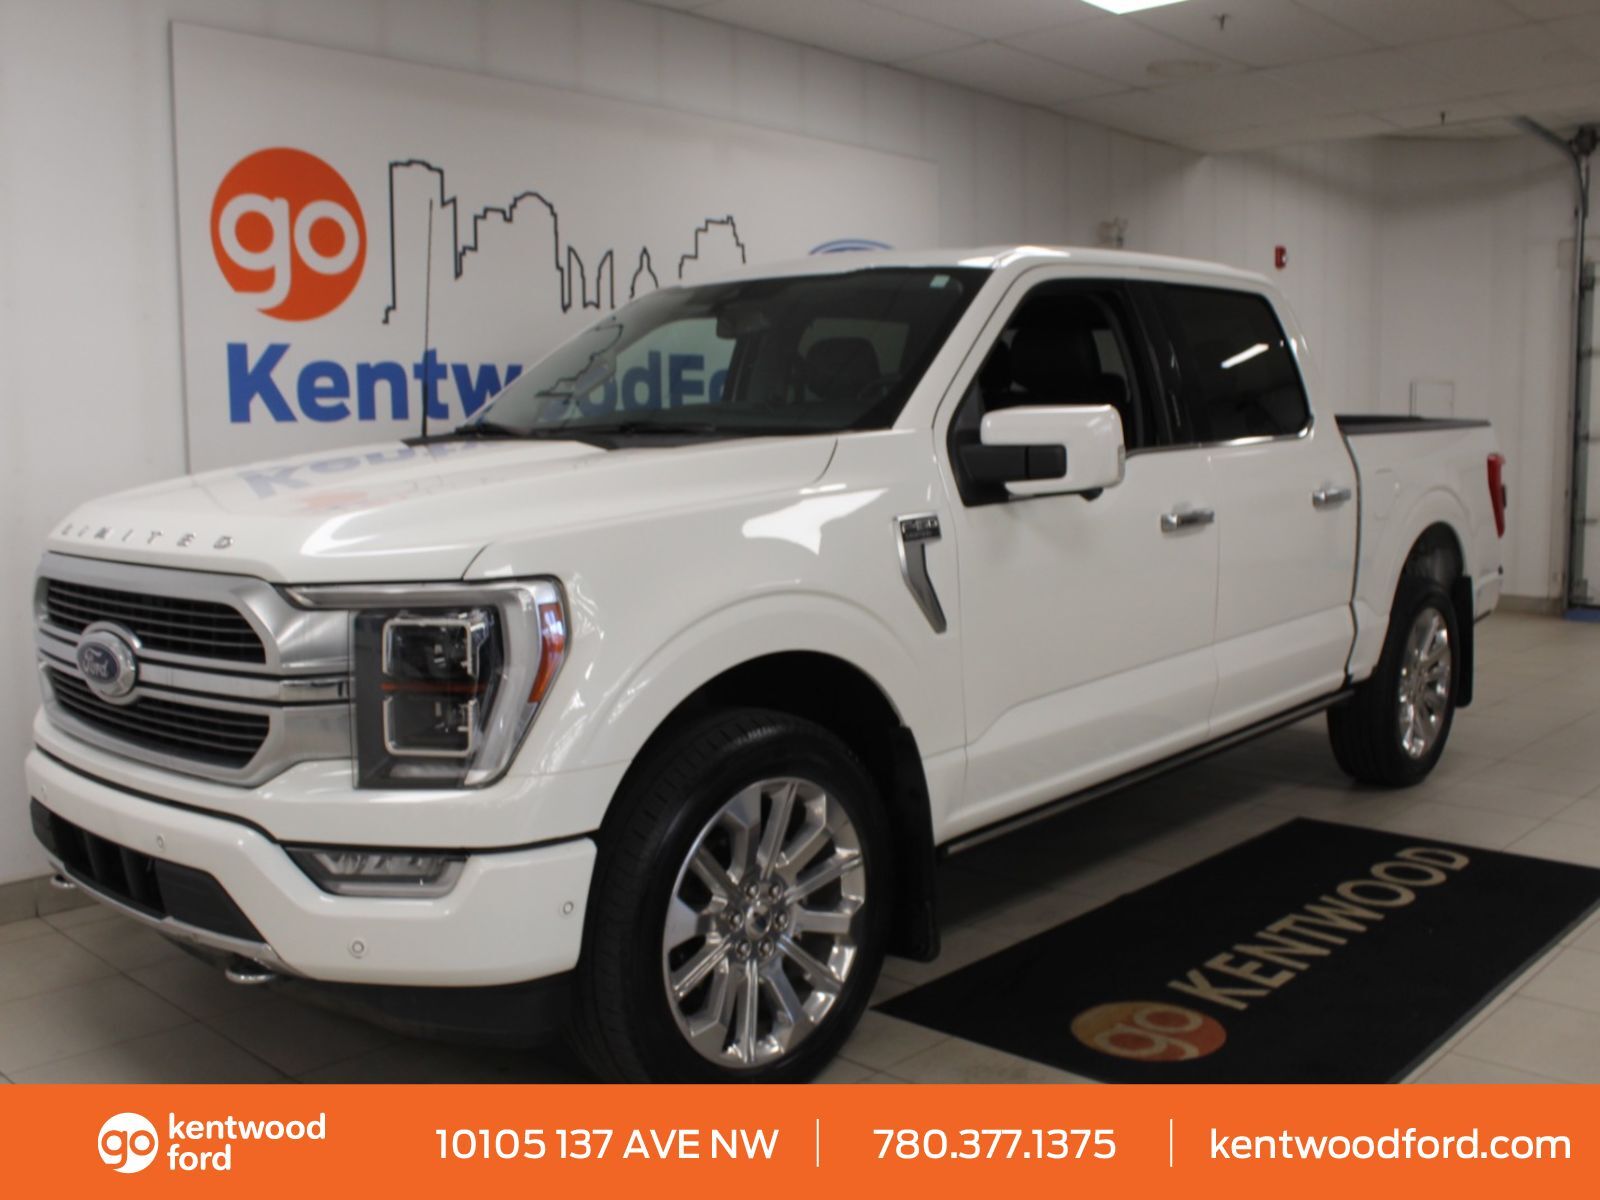 2022 Ford F-150 Limited | 4x4 | Heated Cooled Leather | 22s | Moon